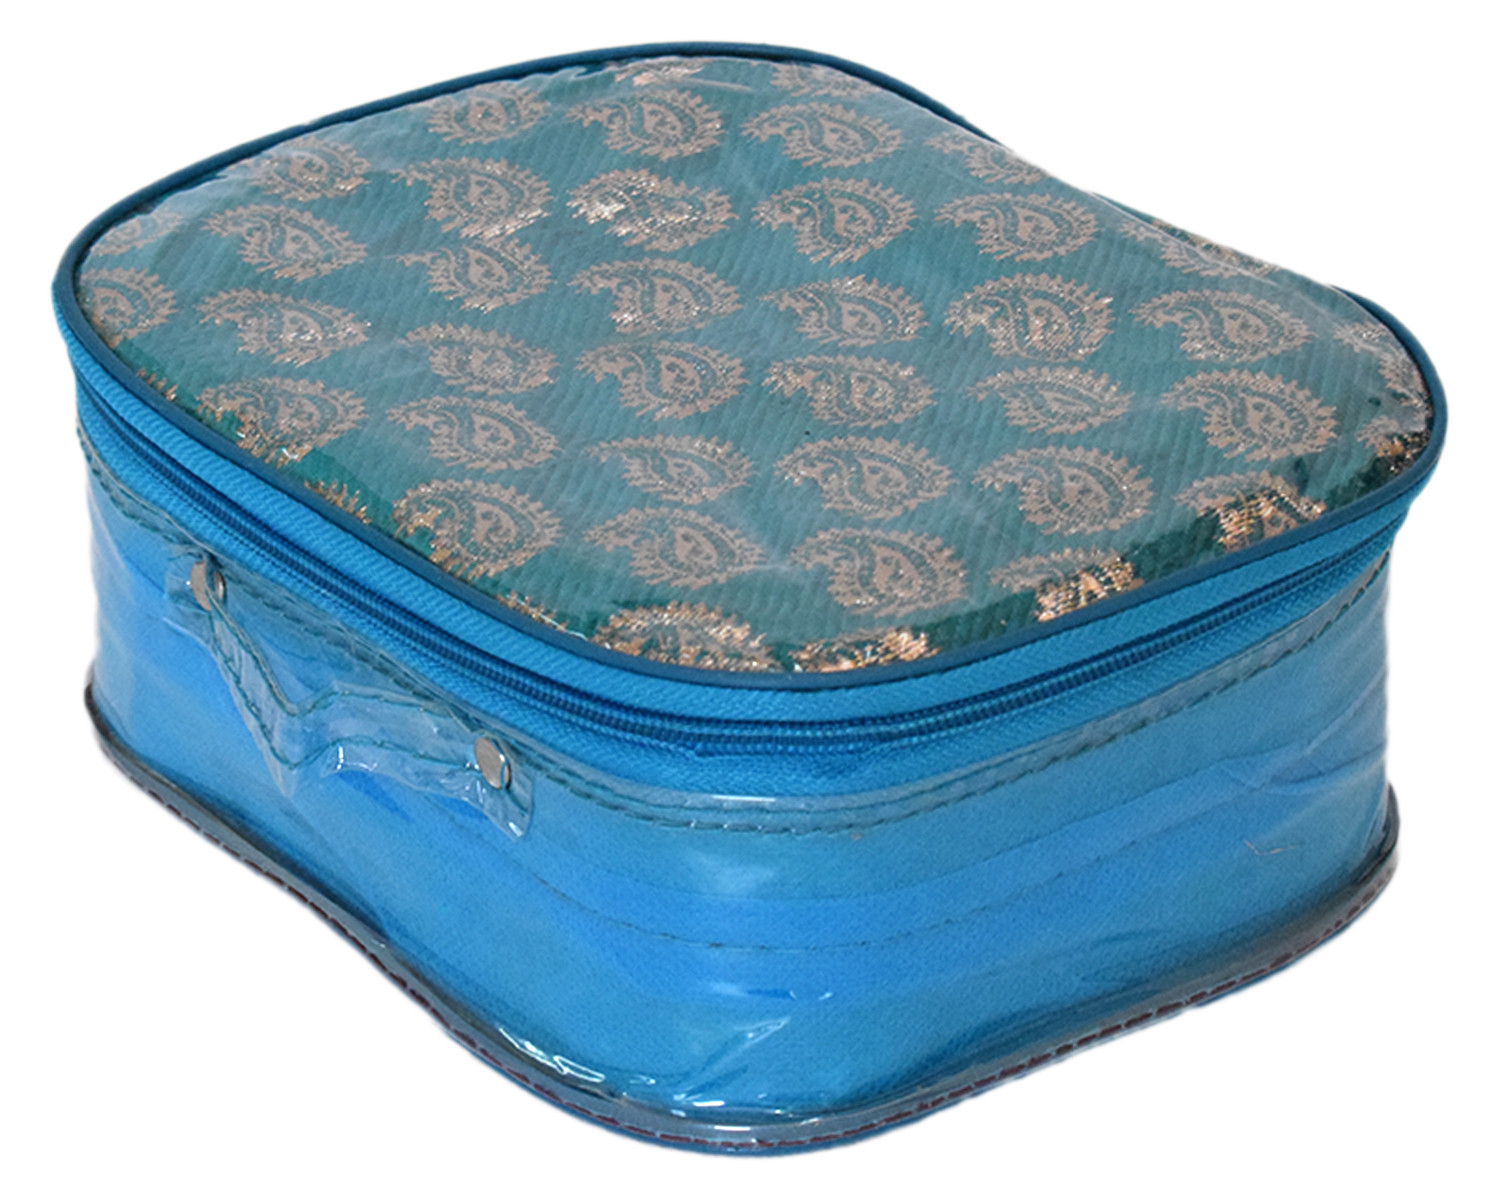 Kuber Industries Carry Printed Multiuses Laminated PVC Makeup/Jewellery/Cosmetic Organizer Bag, Travel Toiletry Pouch With Tranasparent Top, Set of 3 (Blue)